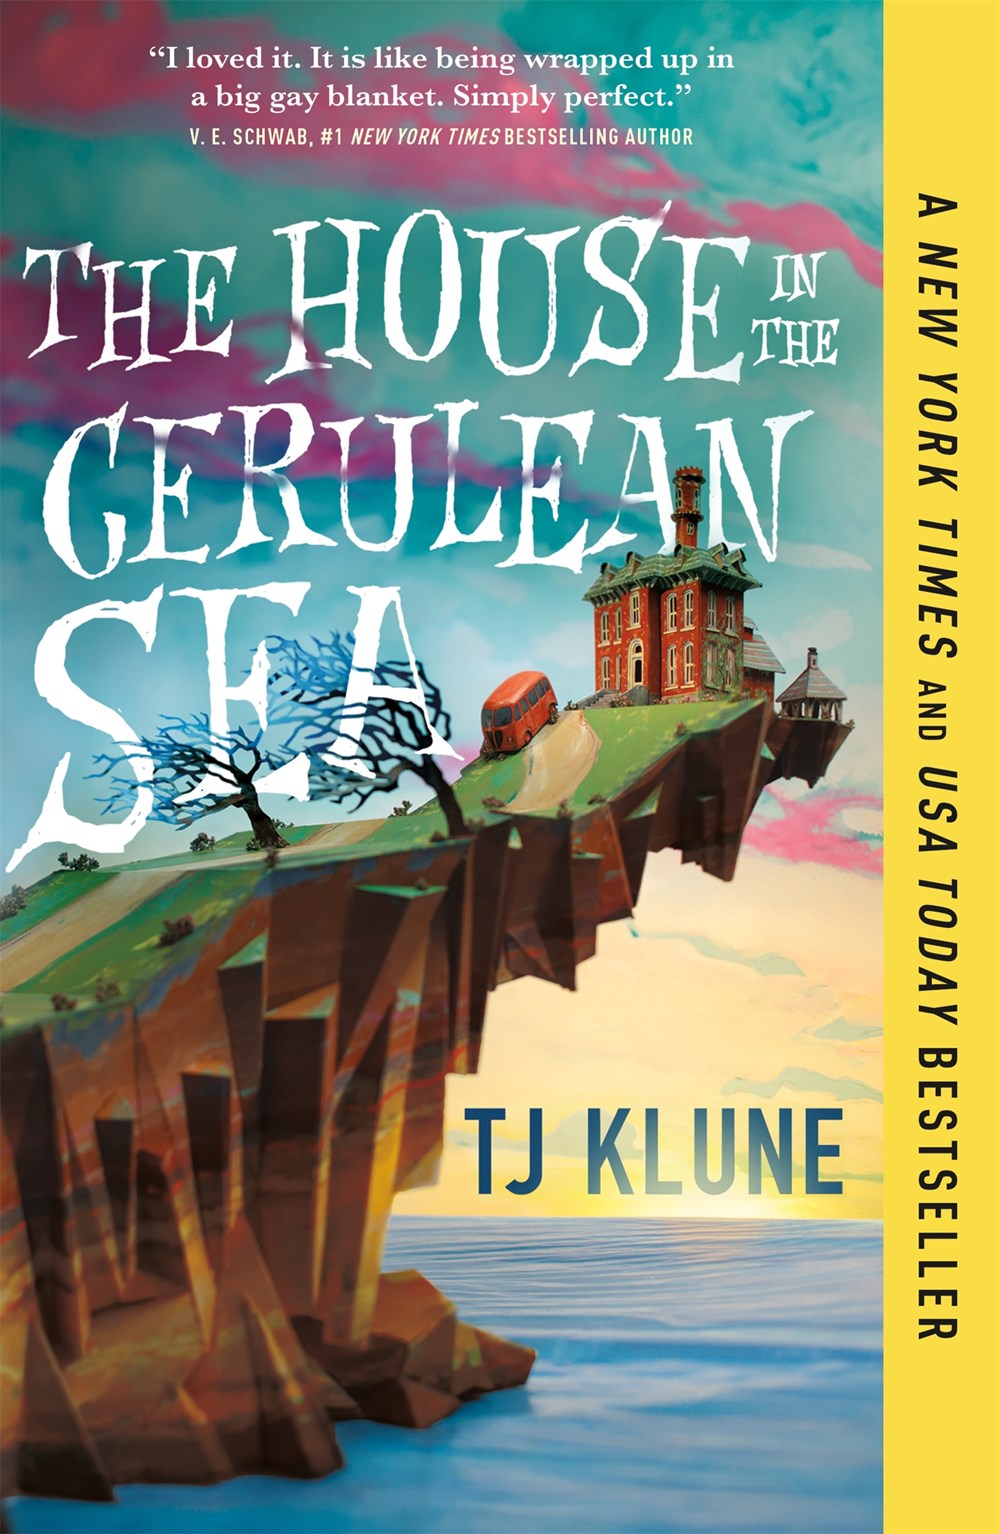 The House on the Cerulean Sea - TJ Klune